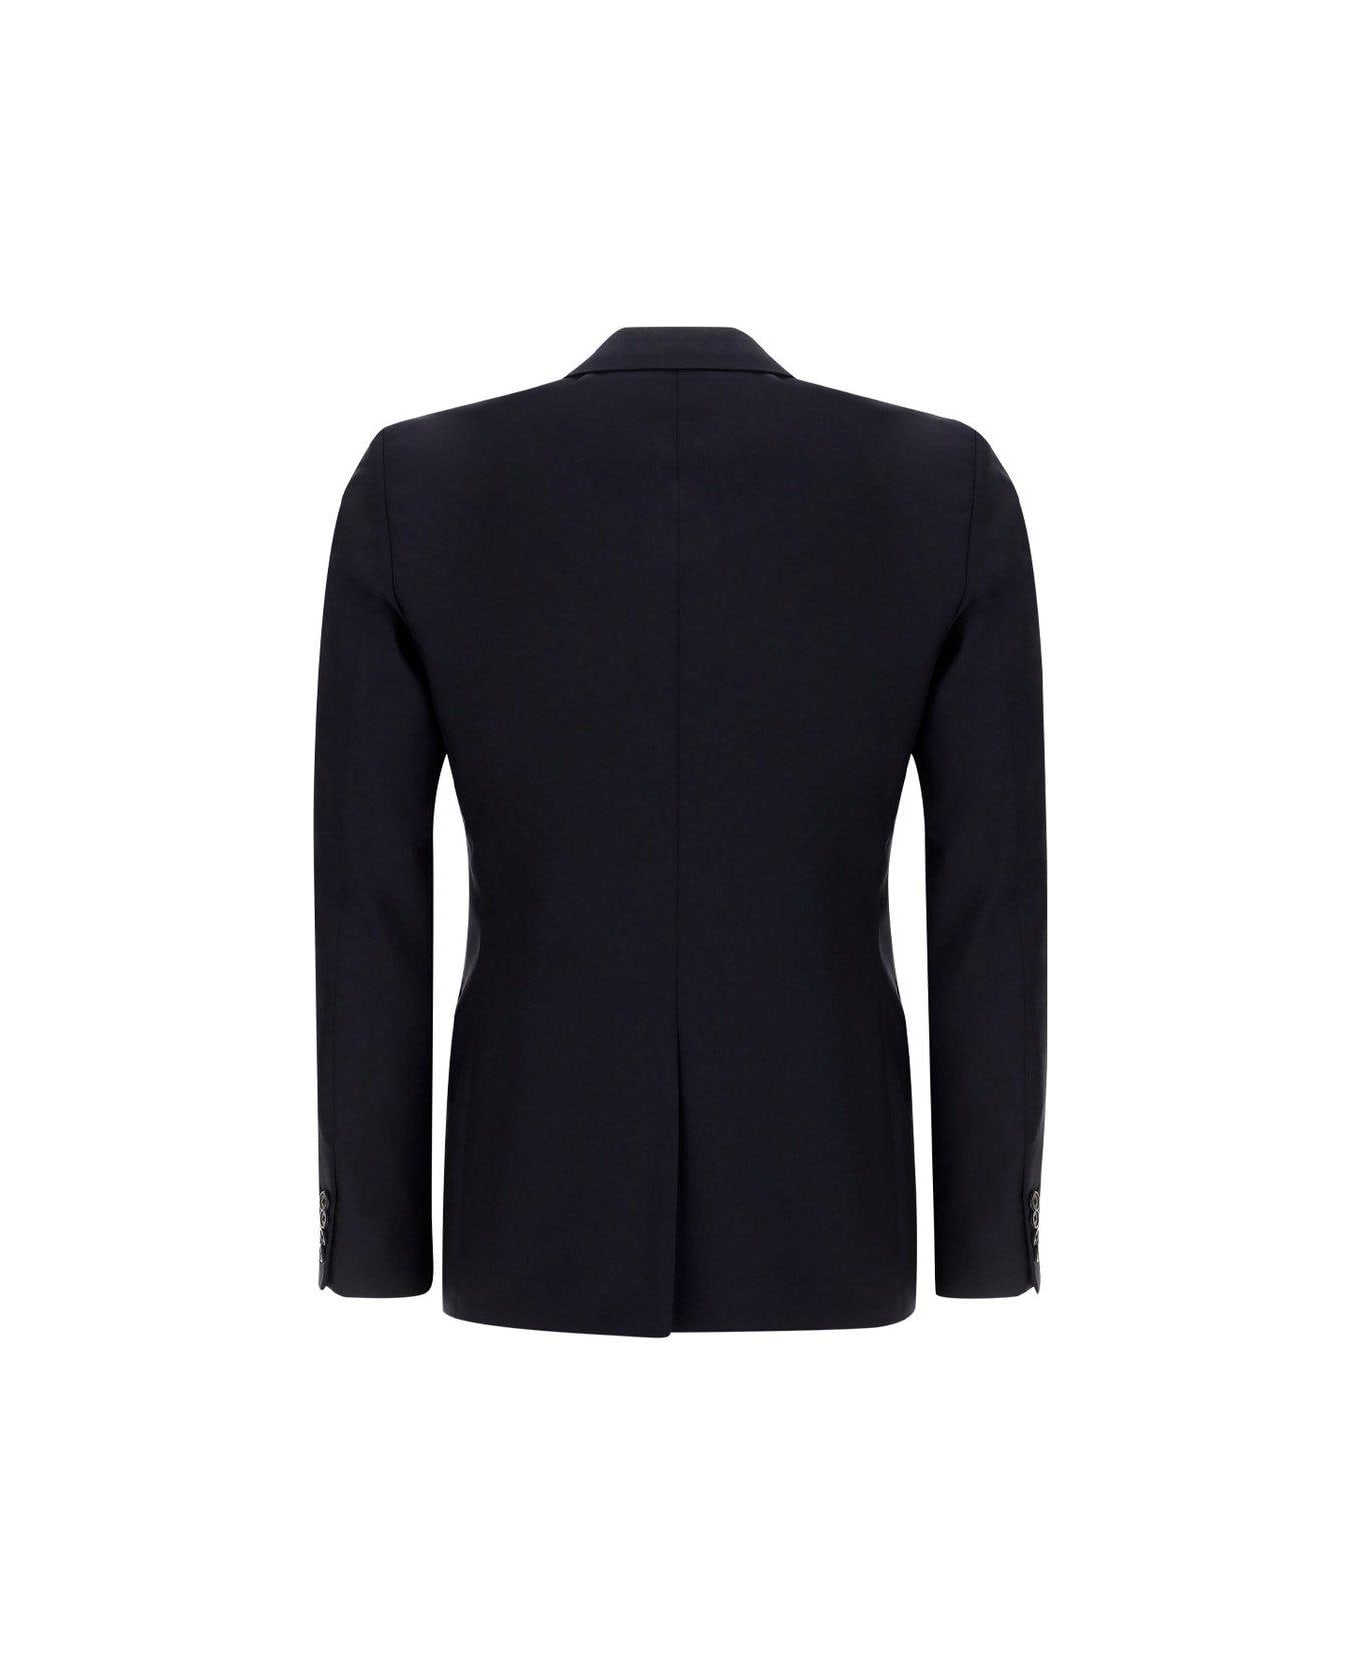 Prada Single-breasted Tailored Two-piece Suit - Blu